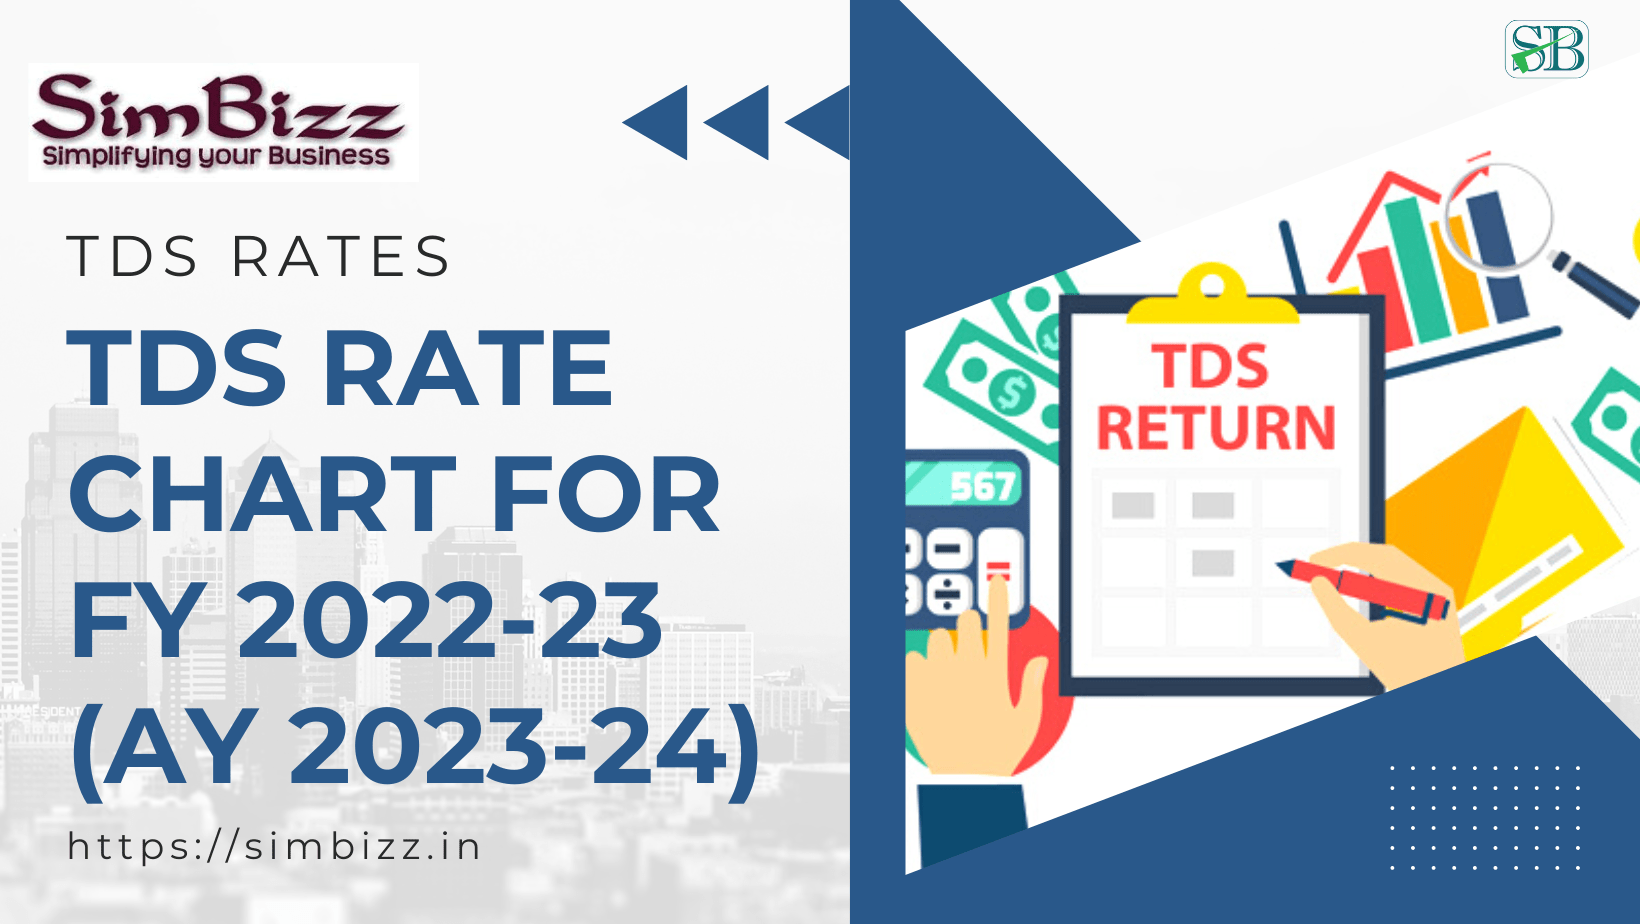 Tds Rate Chart For Fy 2022 23 Ay 2023 24 Simbizz 6458